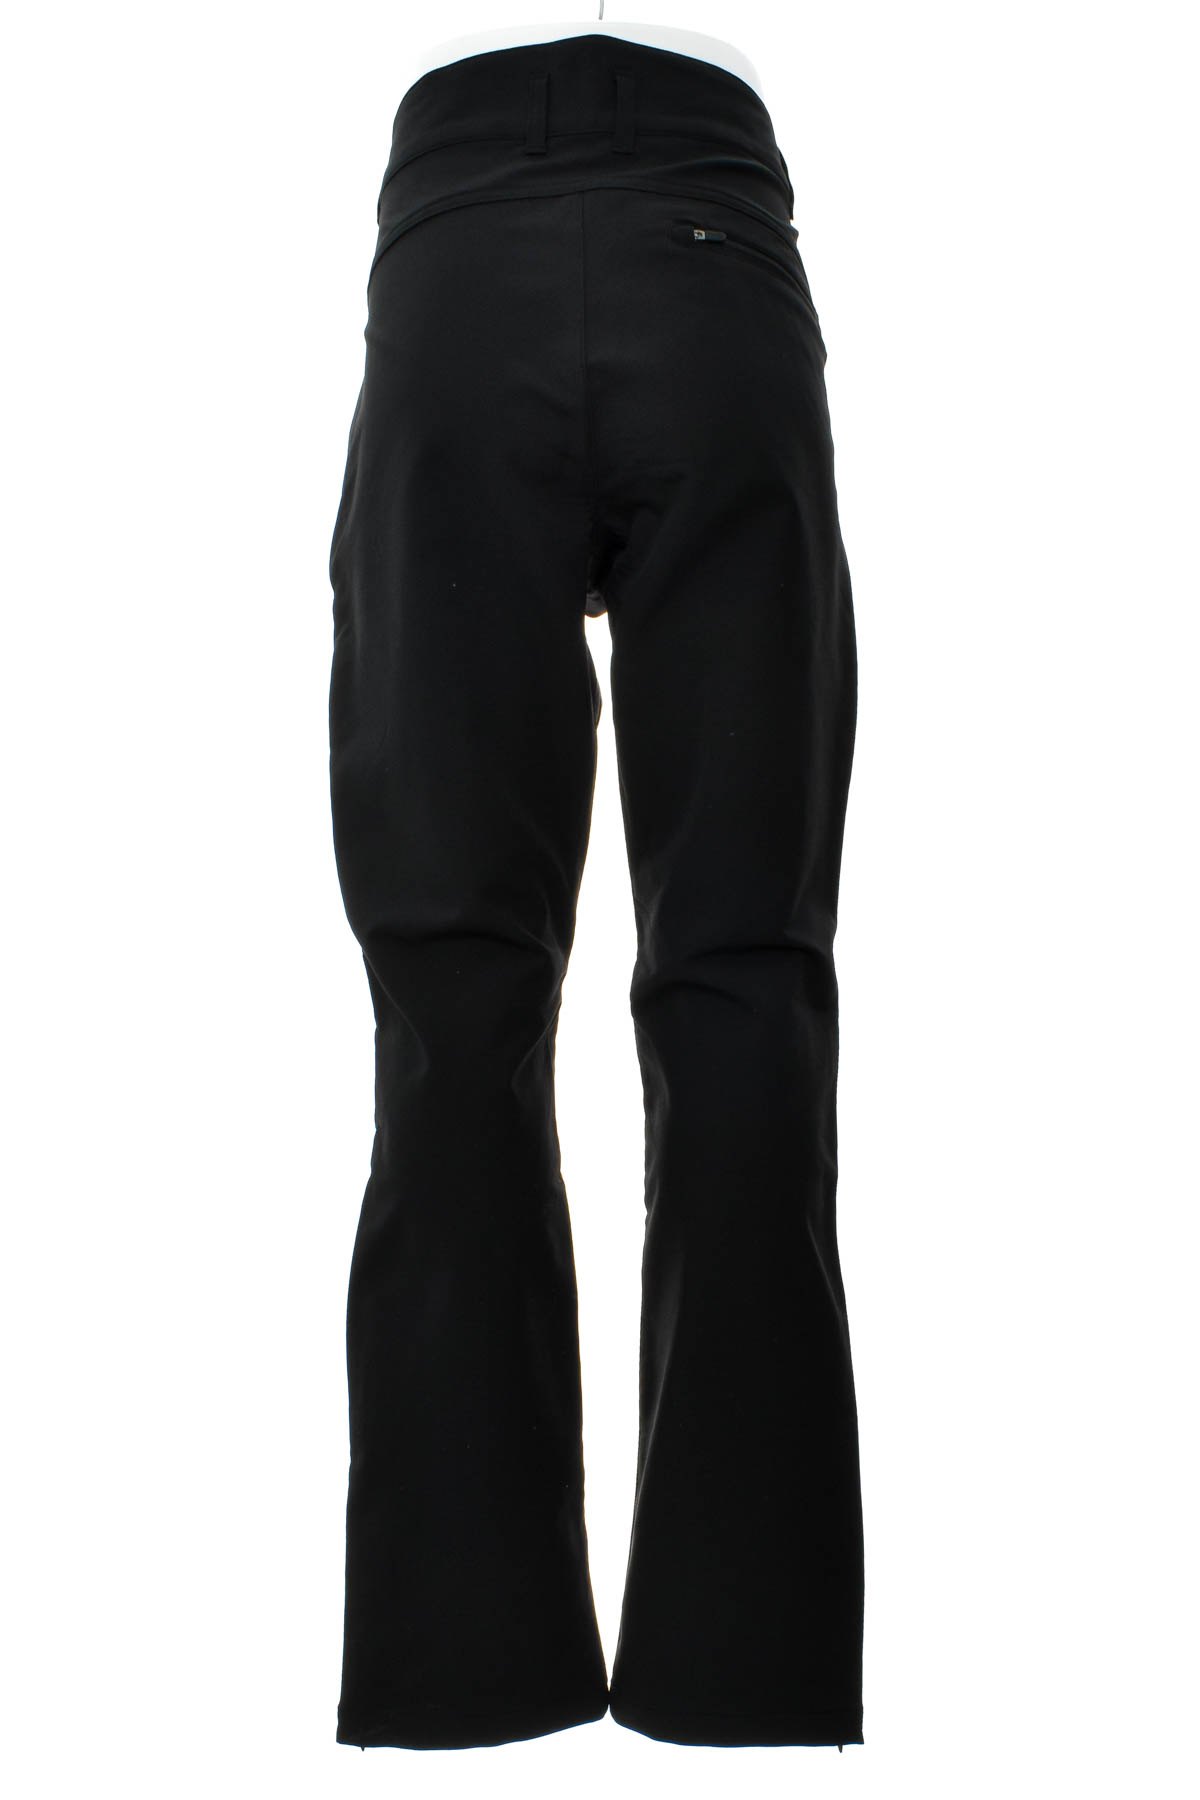 Men's trousers - Active by Tchibo - 1